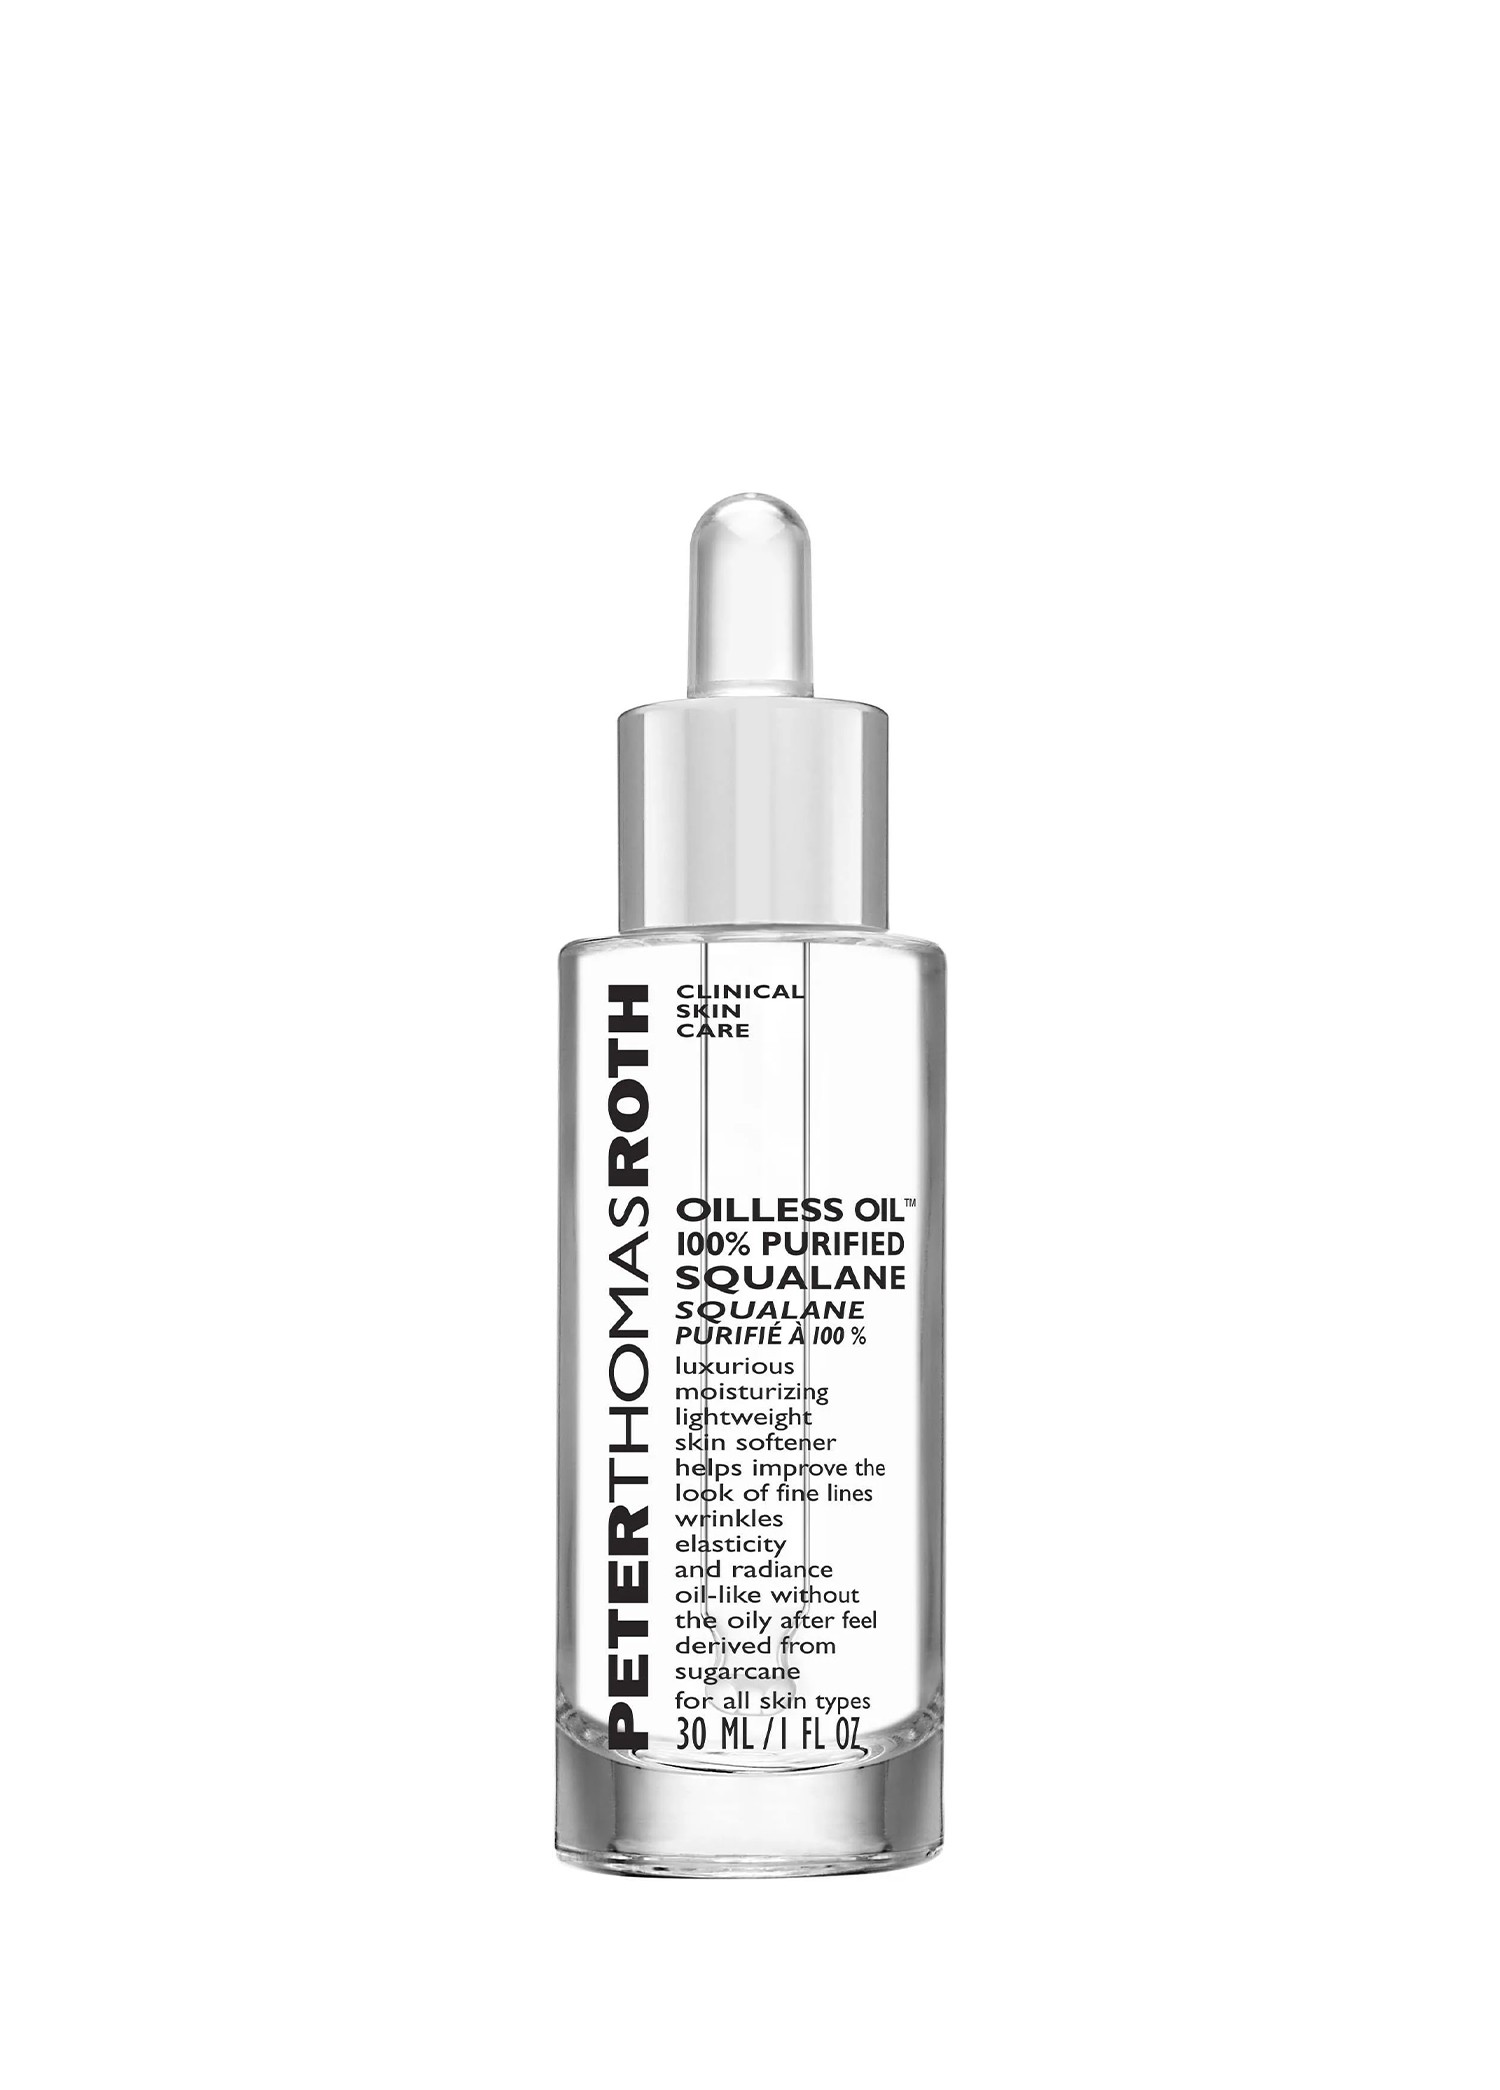 Oilless Oil Purified Squalane 30 ml